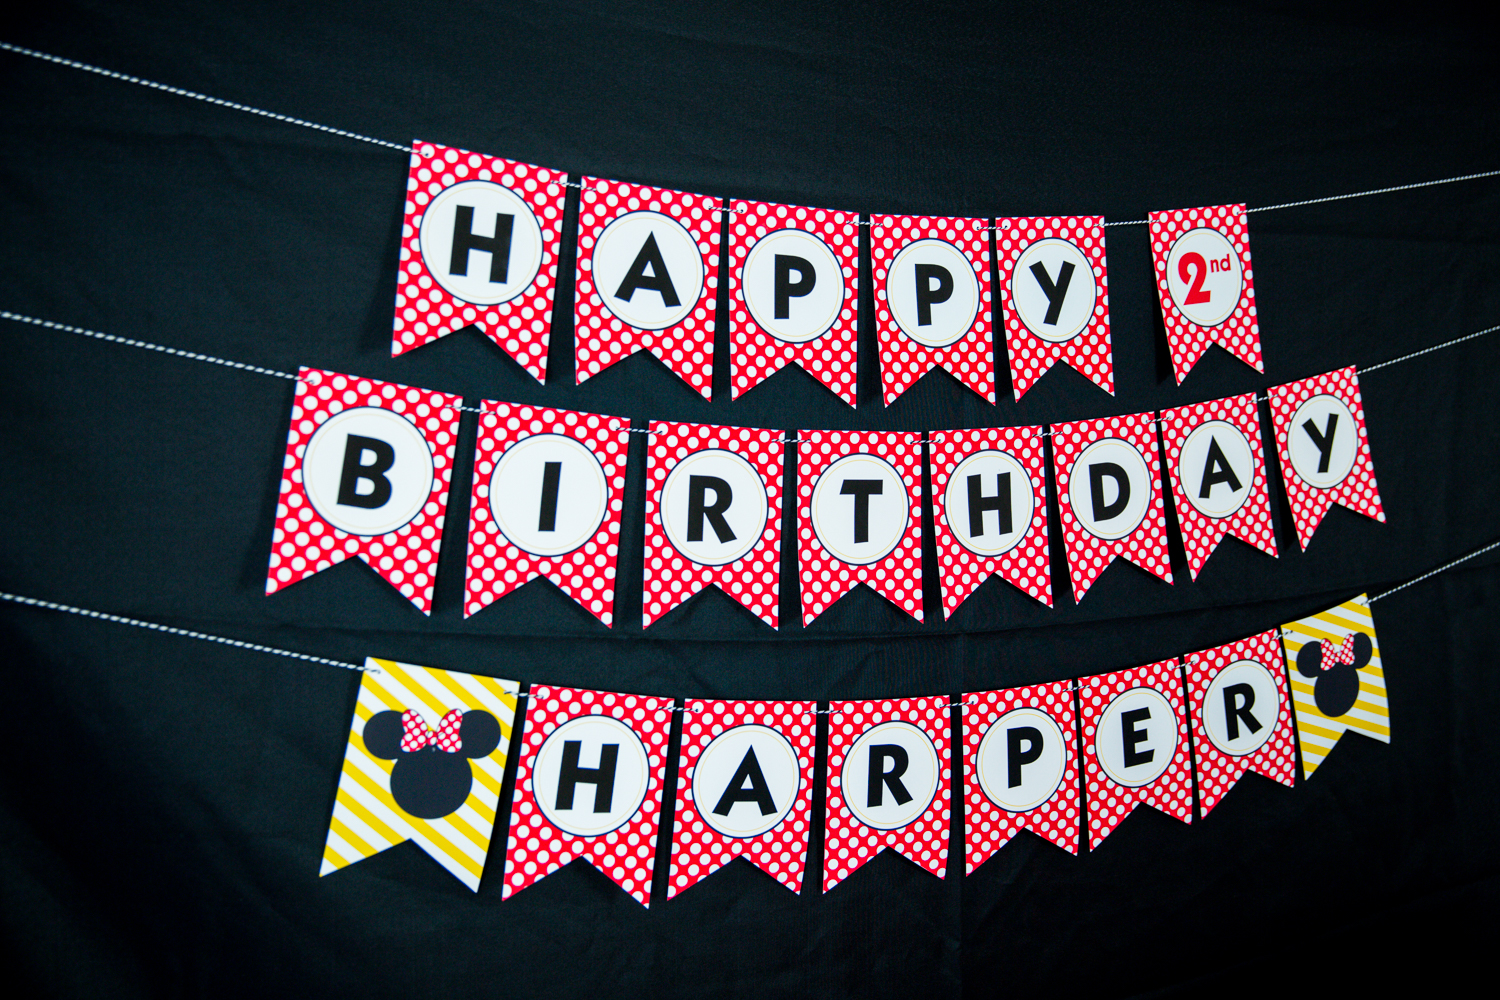 minnie-mouse-birthday-banner-in-red-505-design-inc